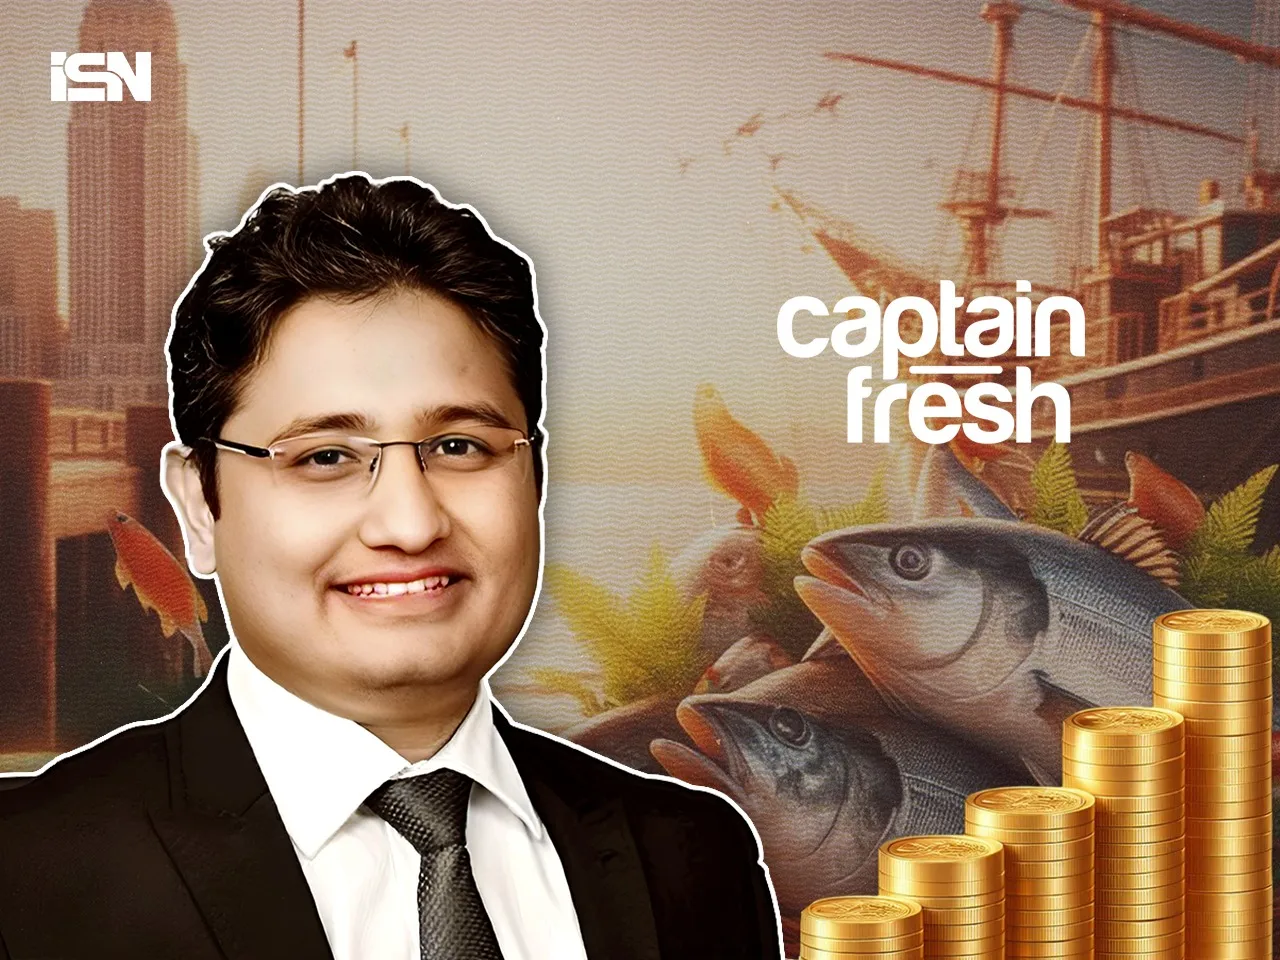 Captain Fresh raises $25M in ongoing funding round led by BII, Andhra Pradesh-based Nekkanti Seafoods Group